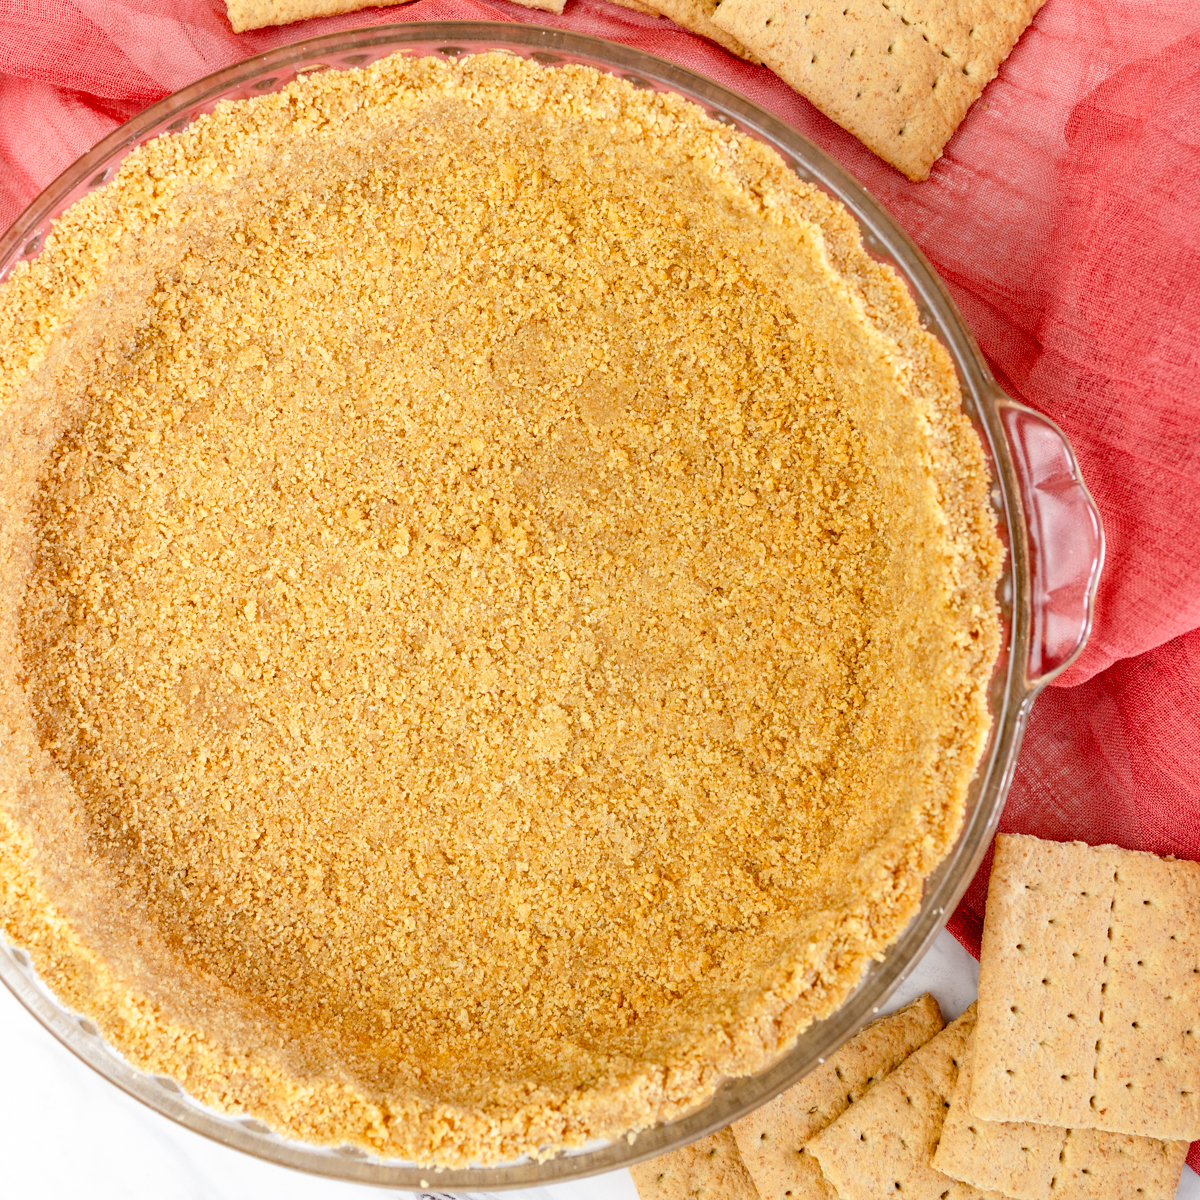 Top view of Homemade Graham Cracker Crust in a glass piw dish on top of a table with a red tea towel.